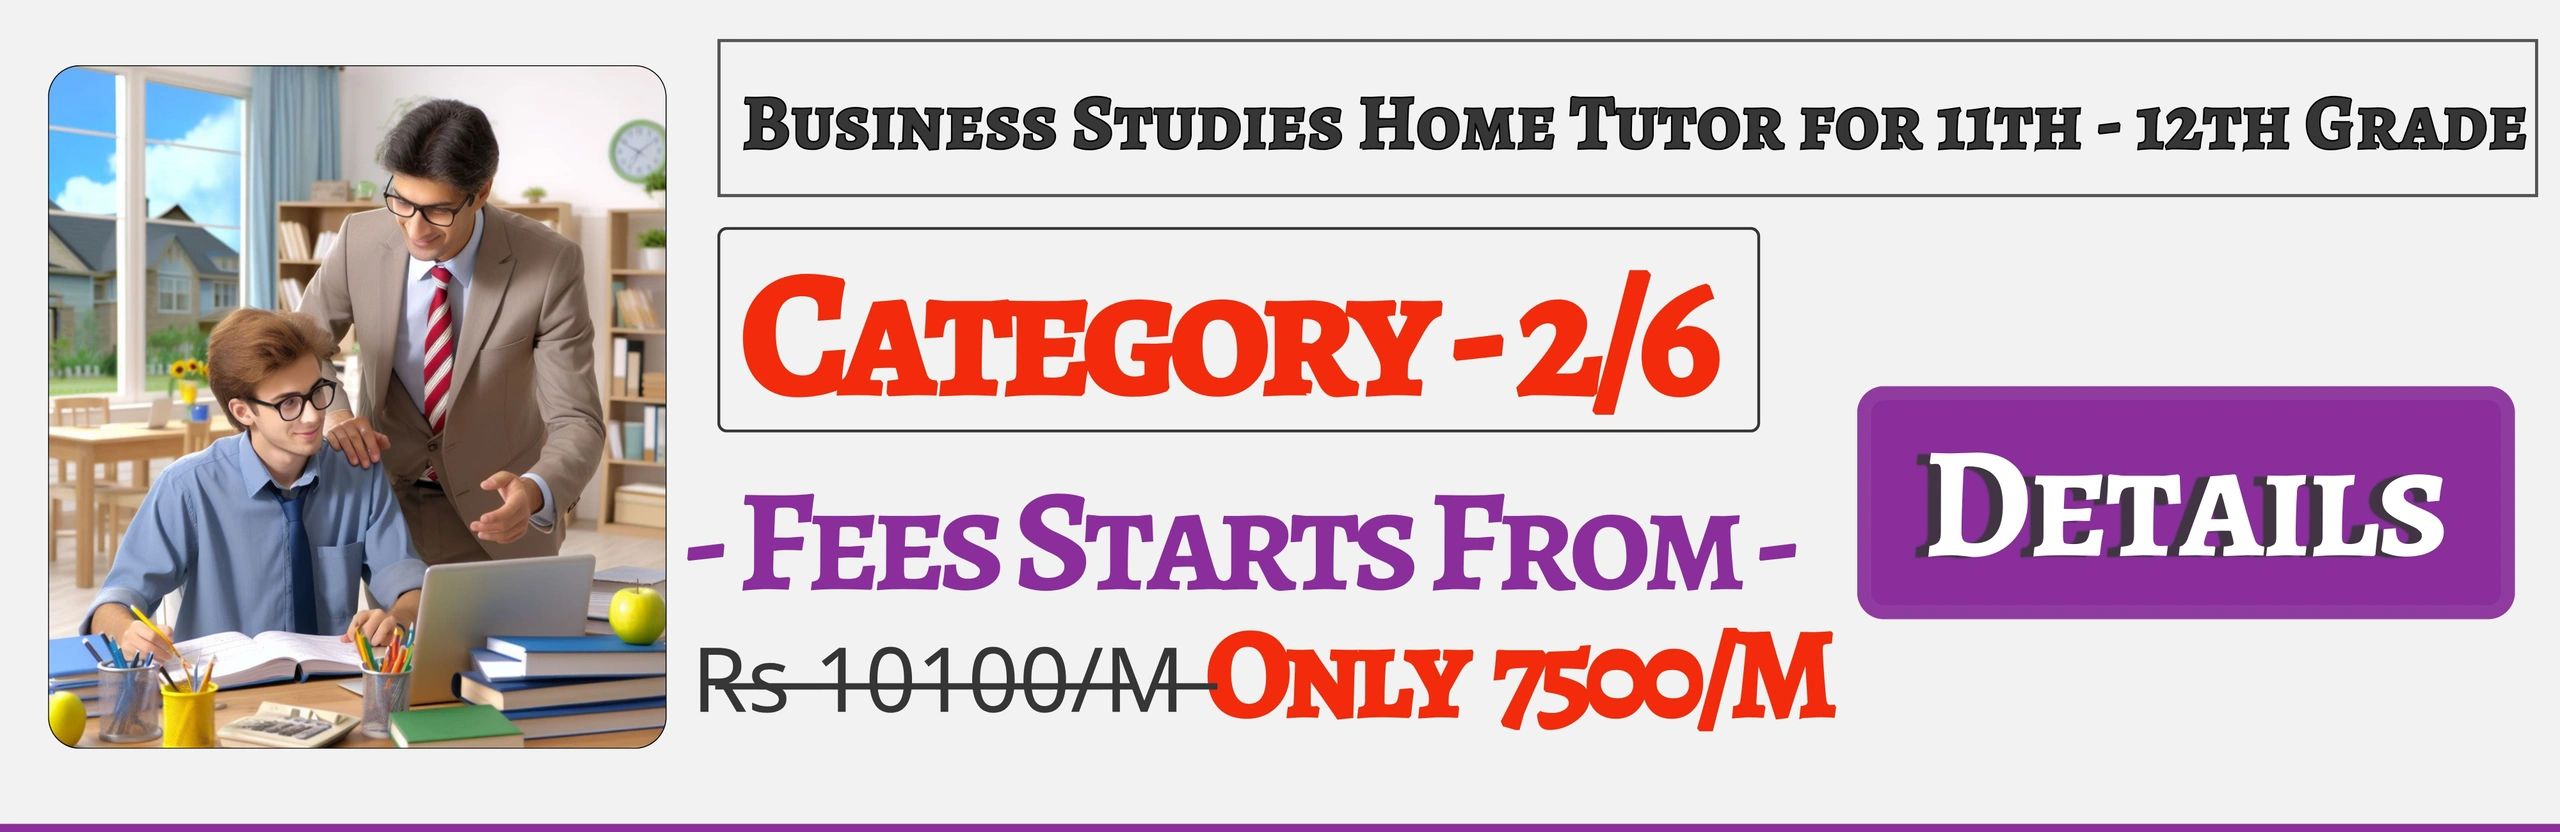 Book Best Nearby Business Studies Home Tuition Tutors For 11th & 12th Jaipur ,Fees Only 7500/M